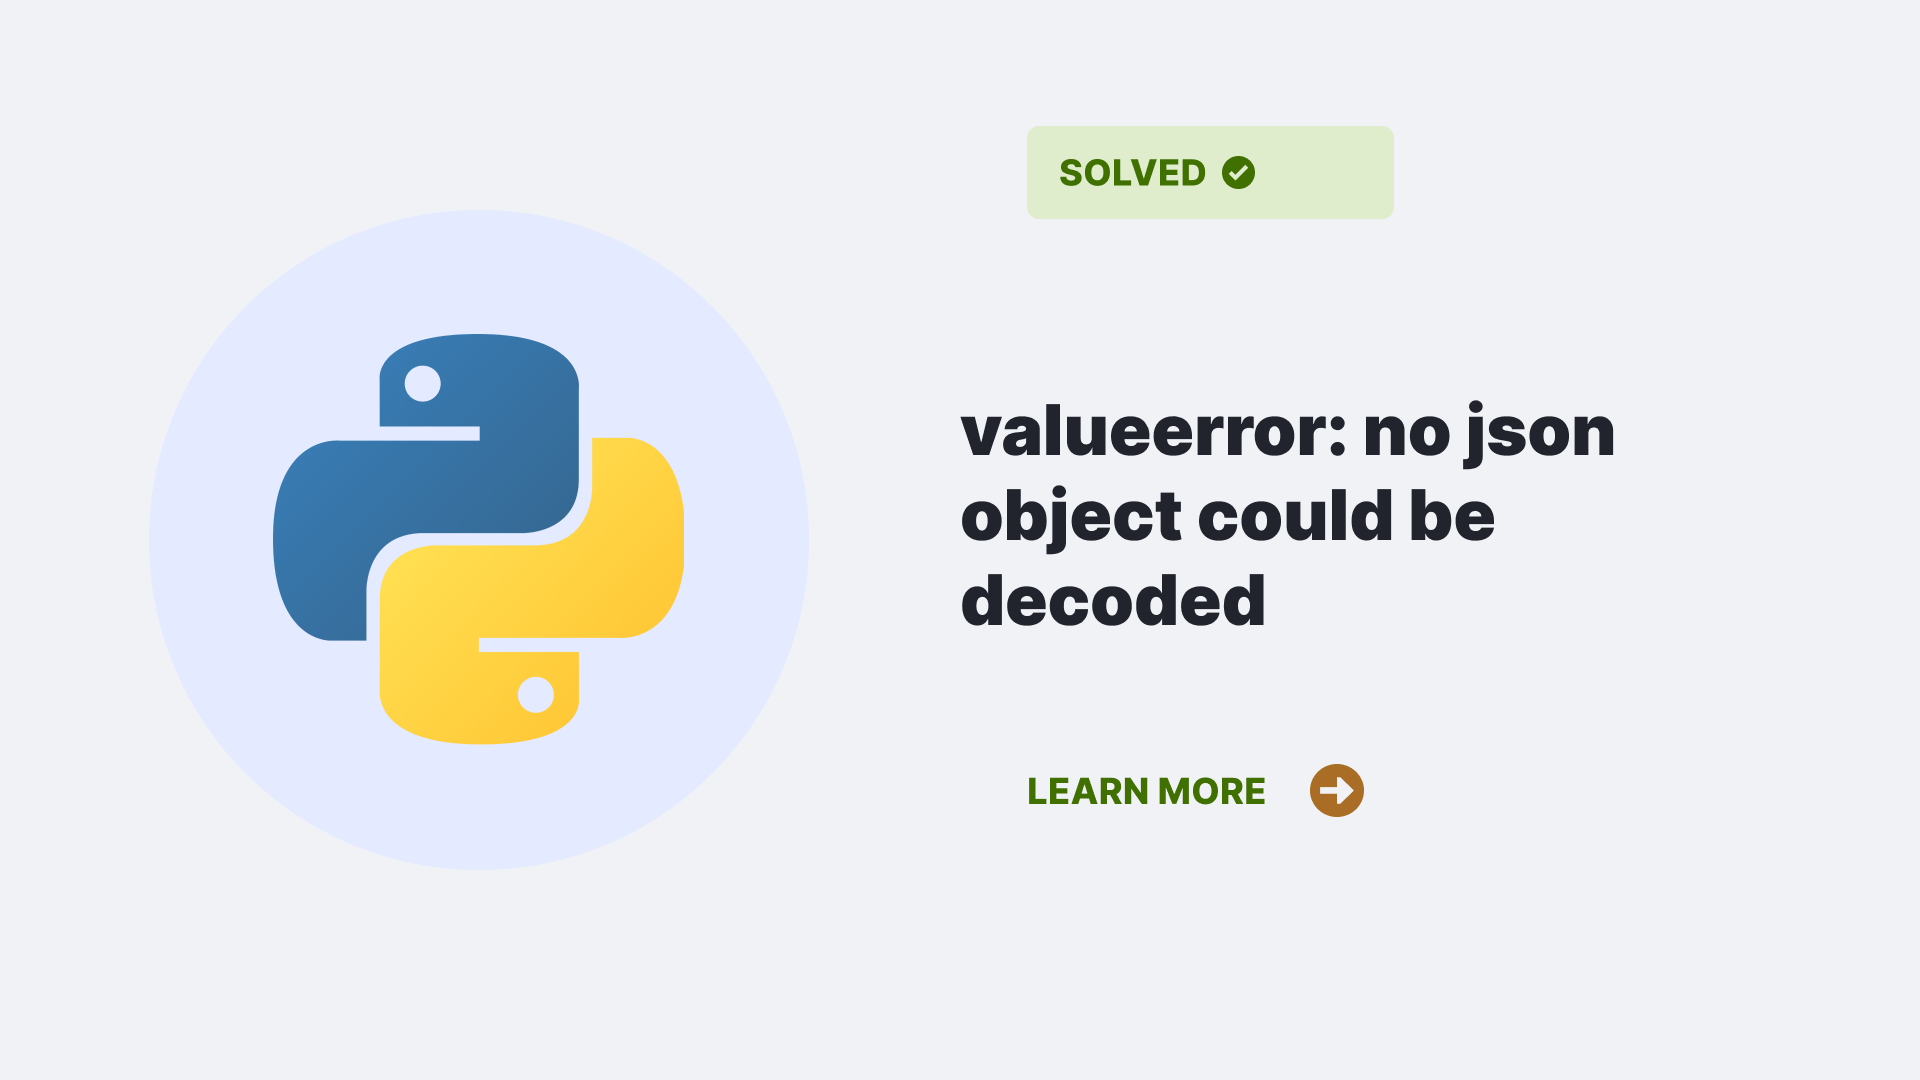 valueerror: no json object could be decoded